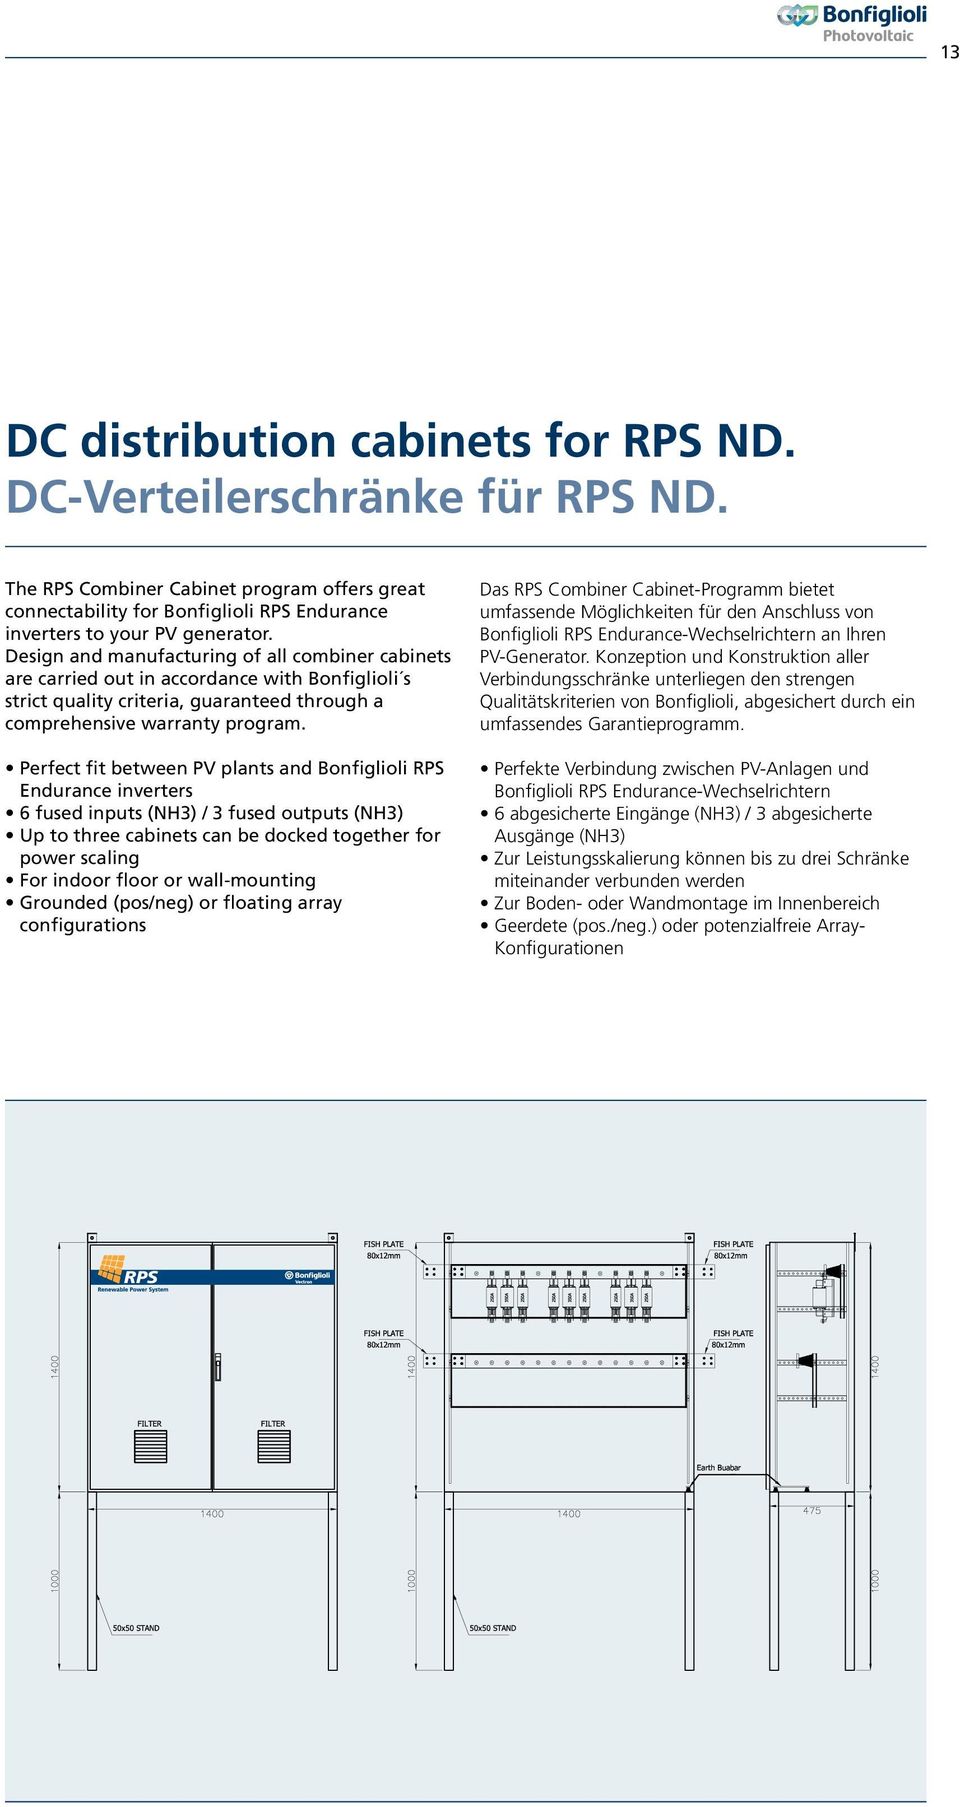 Perfect fit between PV plants and RPS Endurance inverters 6 fused inputs (NH3) / 3 fused outputs (NH3) Up to three cabinets can be docked together for power scaling For indoor floor or wall-mounting